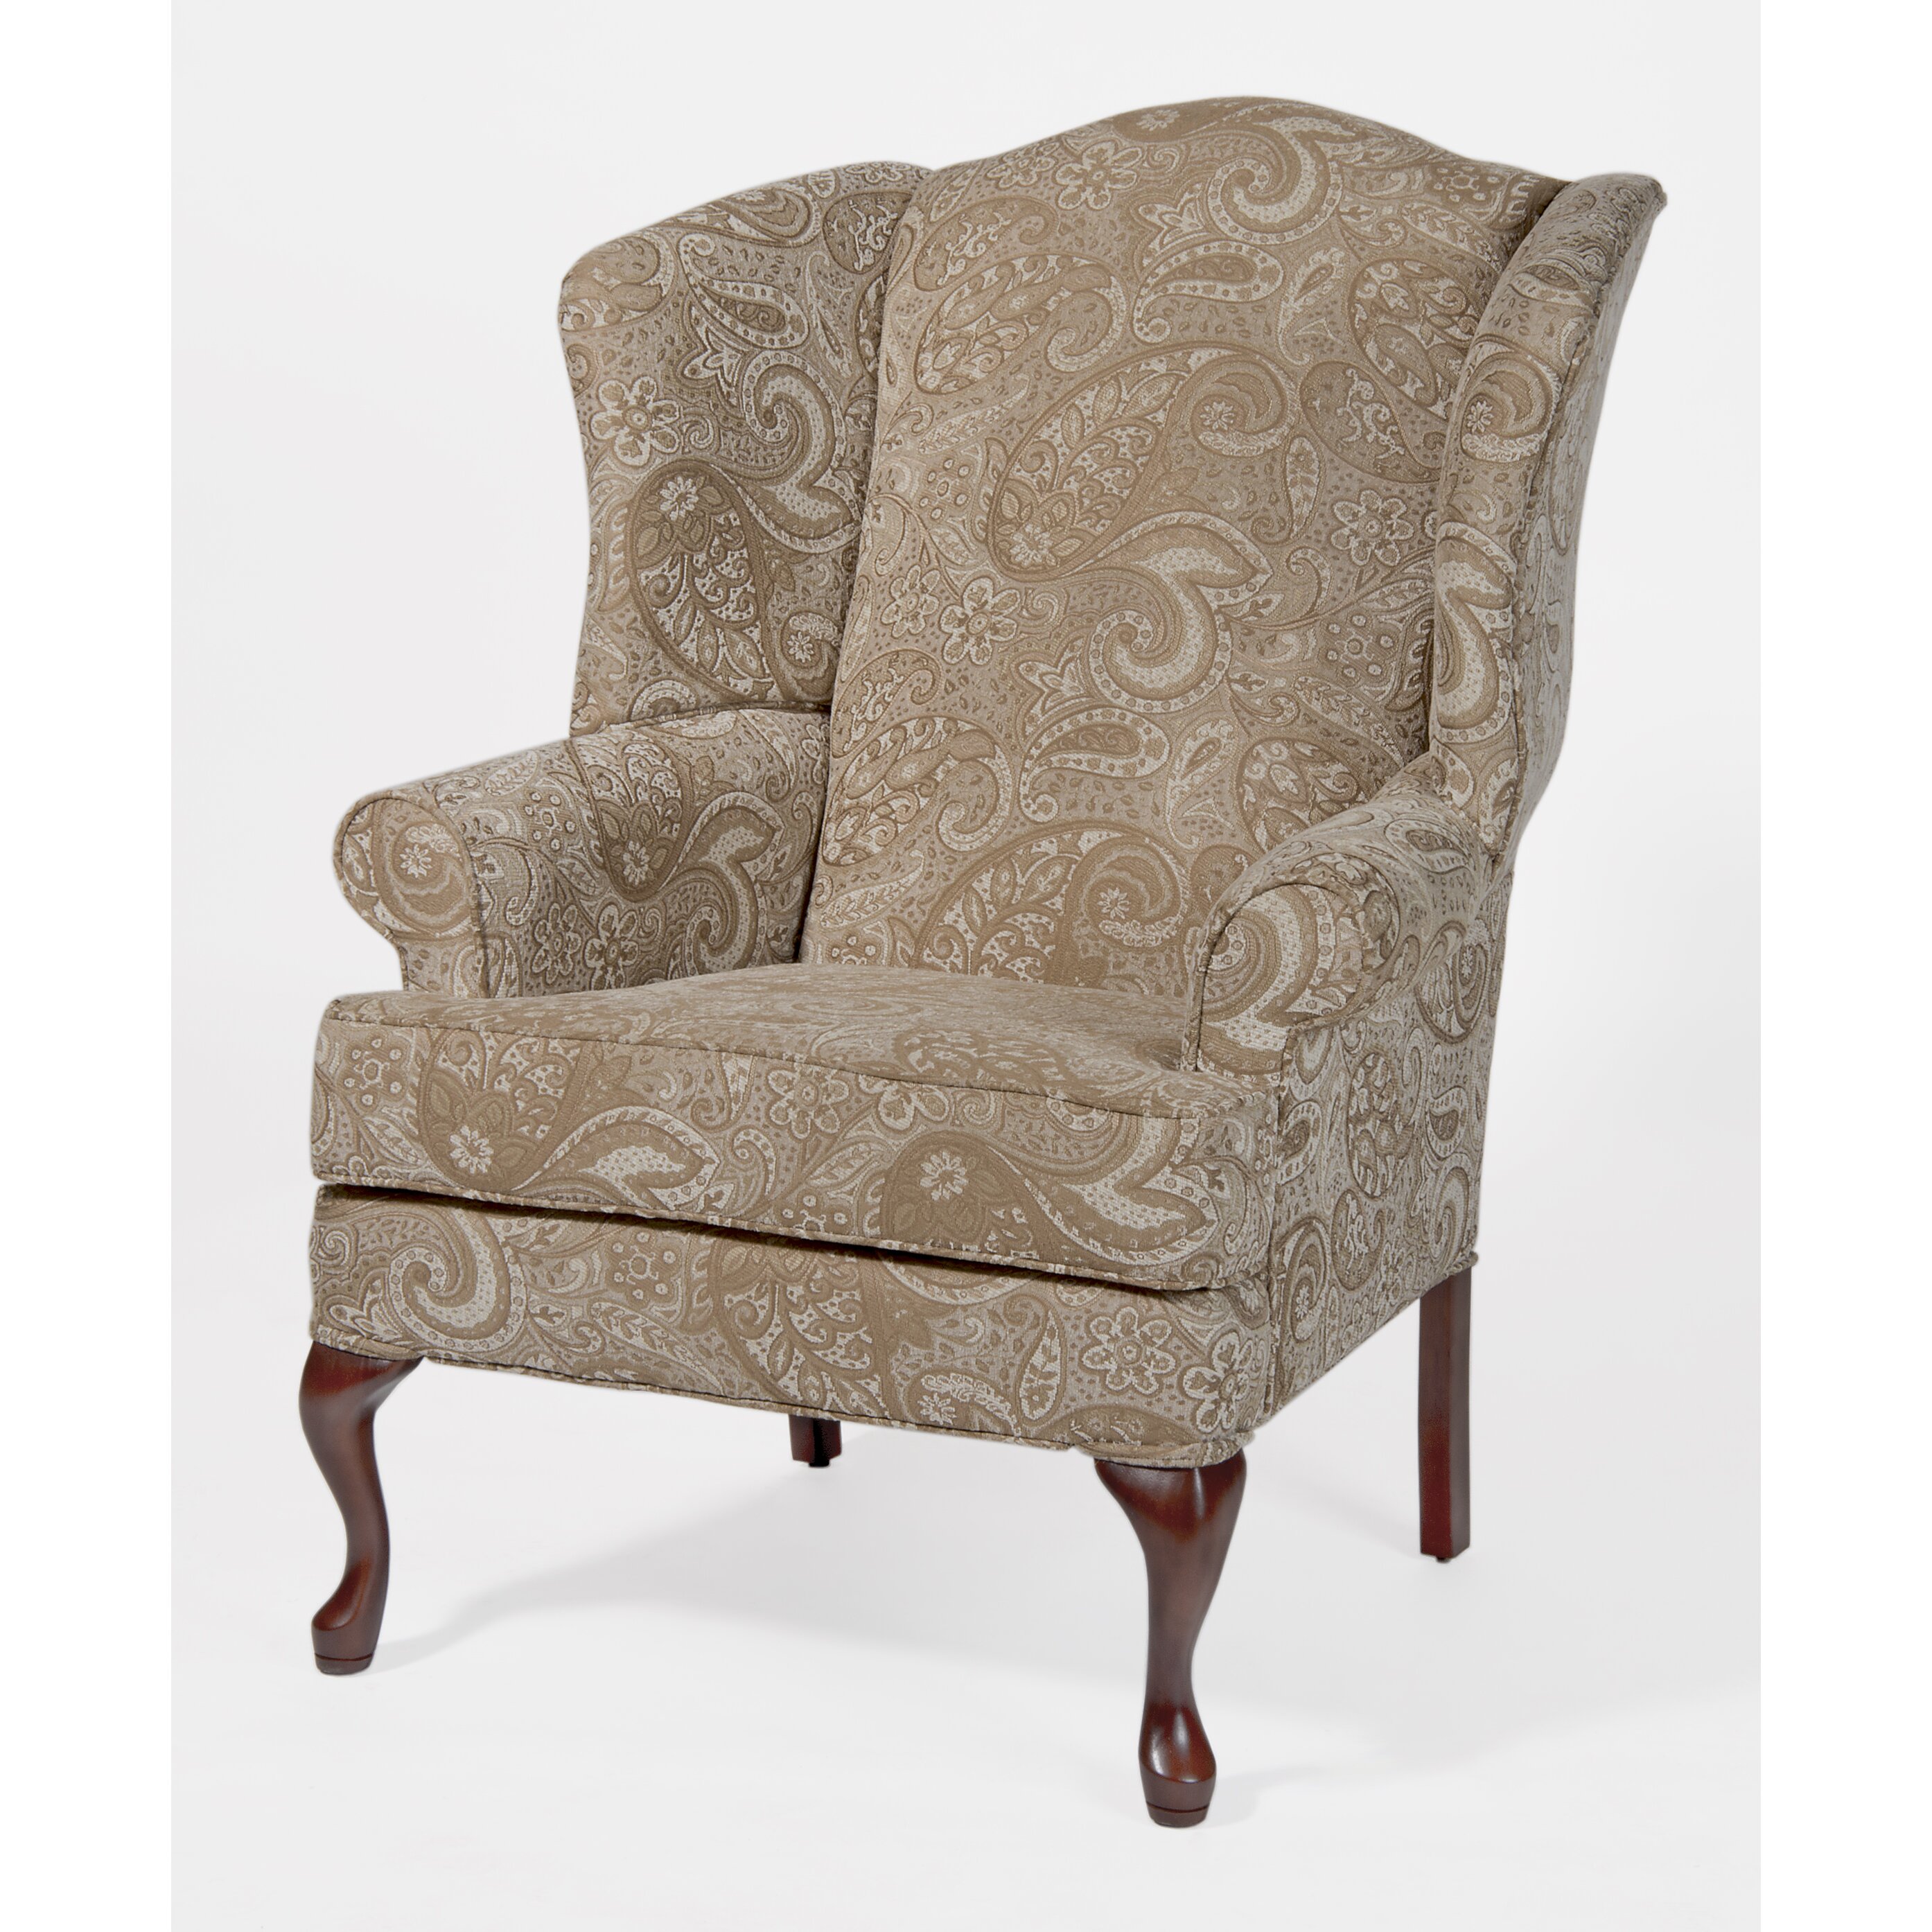 Paisley Wingback Chair 7000 11 